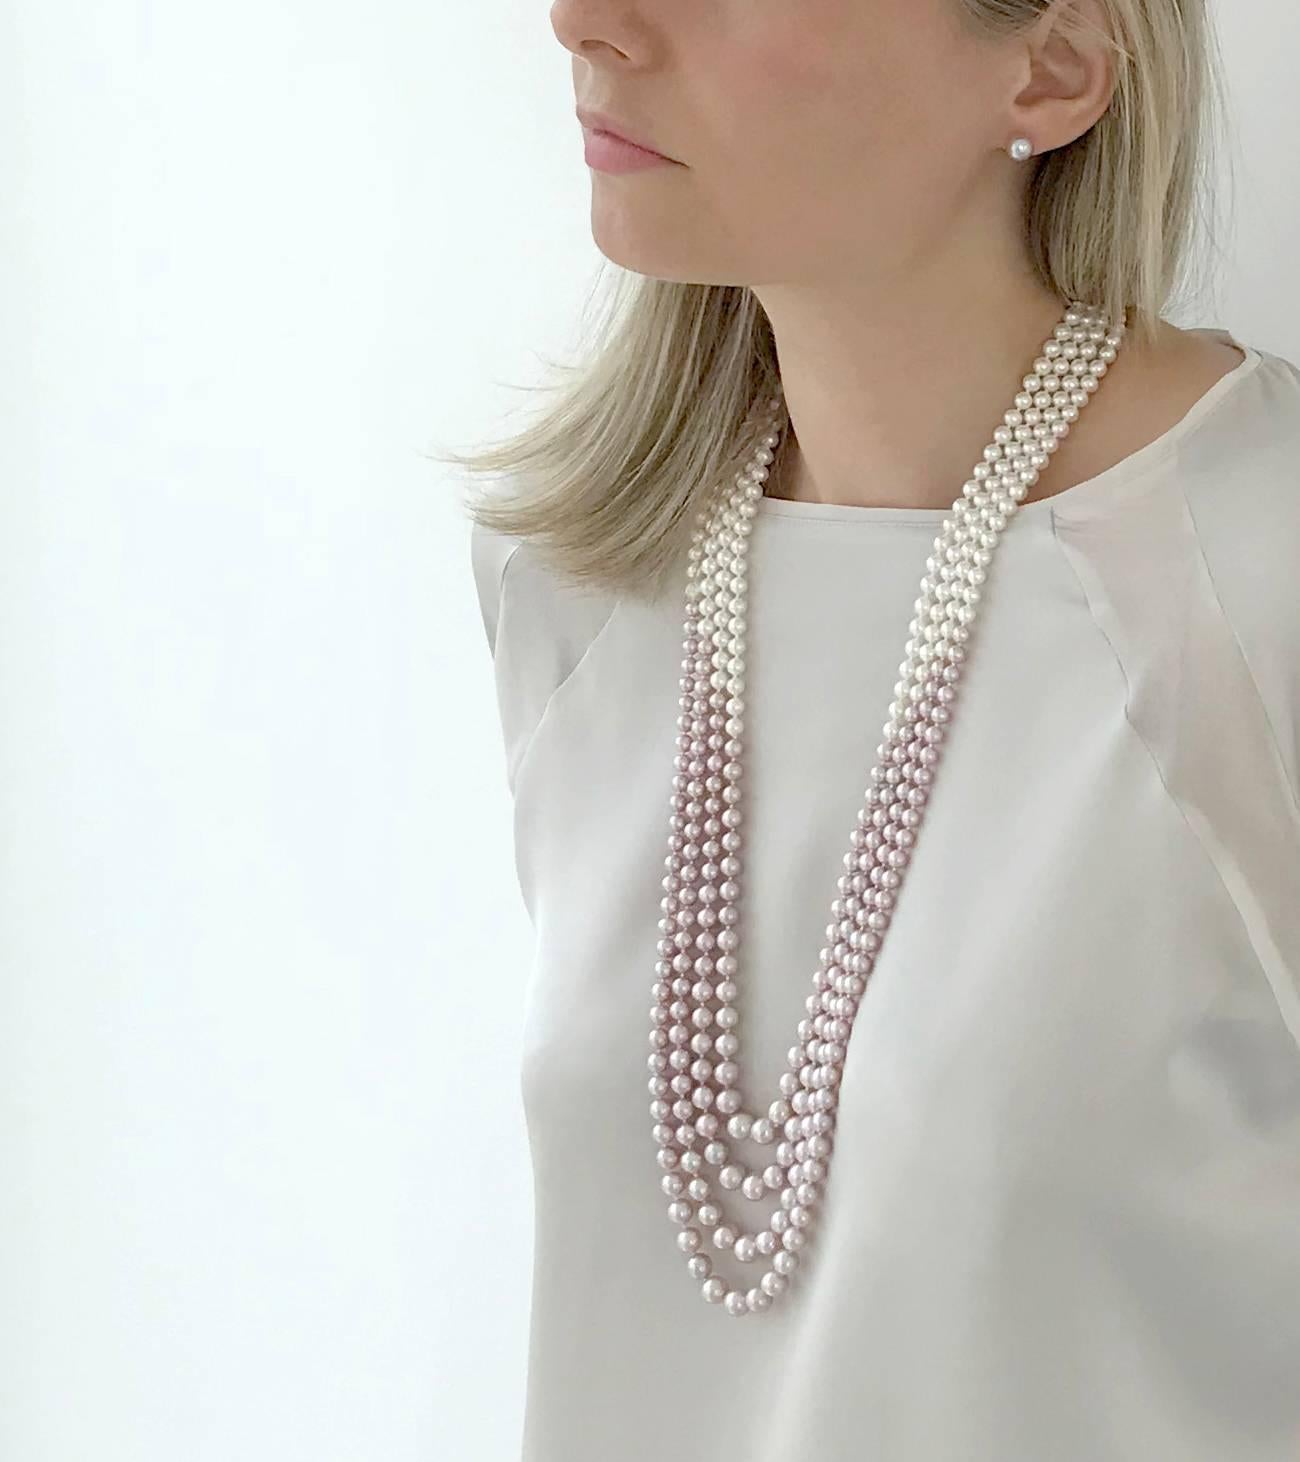 This bold Necklace by Yoko London displays a delicate pattern of Pink Freshwater Pearls at its forefront and rear, with an intersecting section of White Freshwater Pearls.

The Pearls within each row gently graduate in size, and secured to an 18